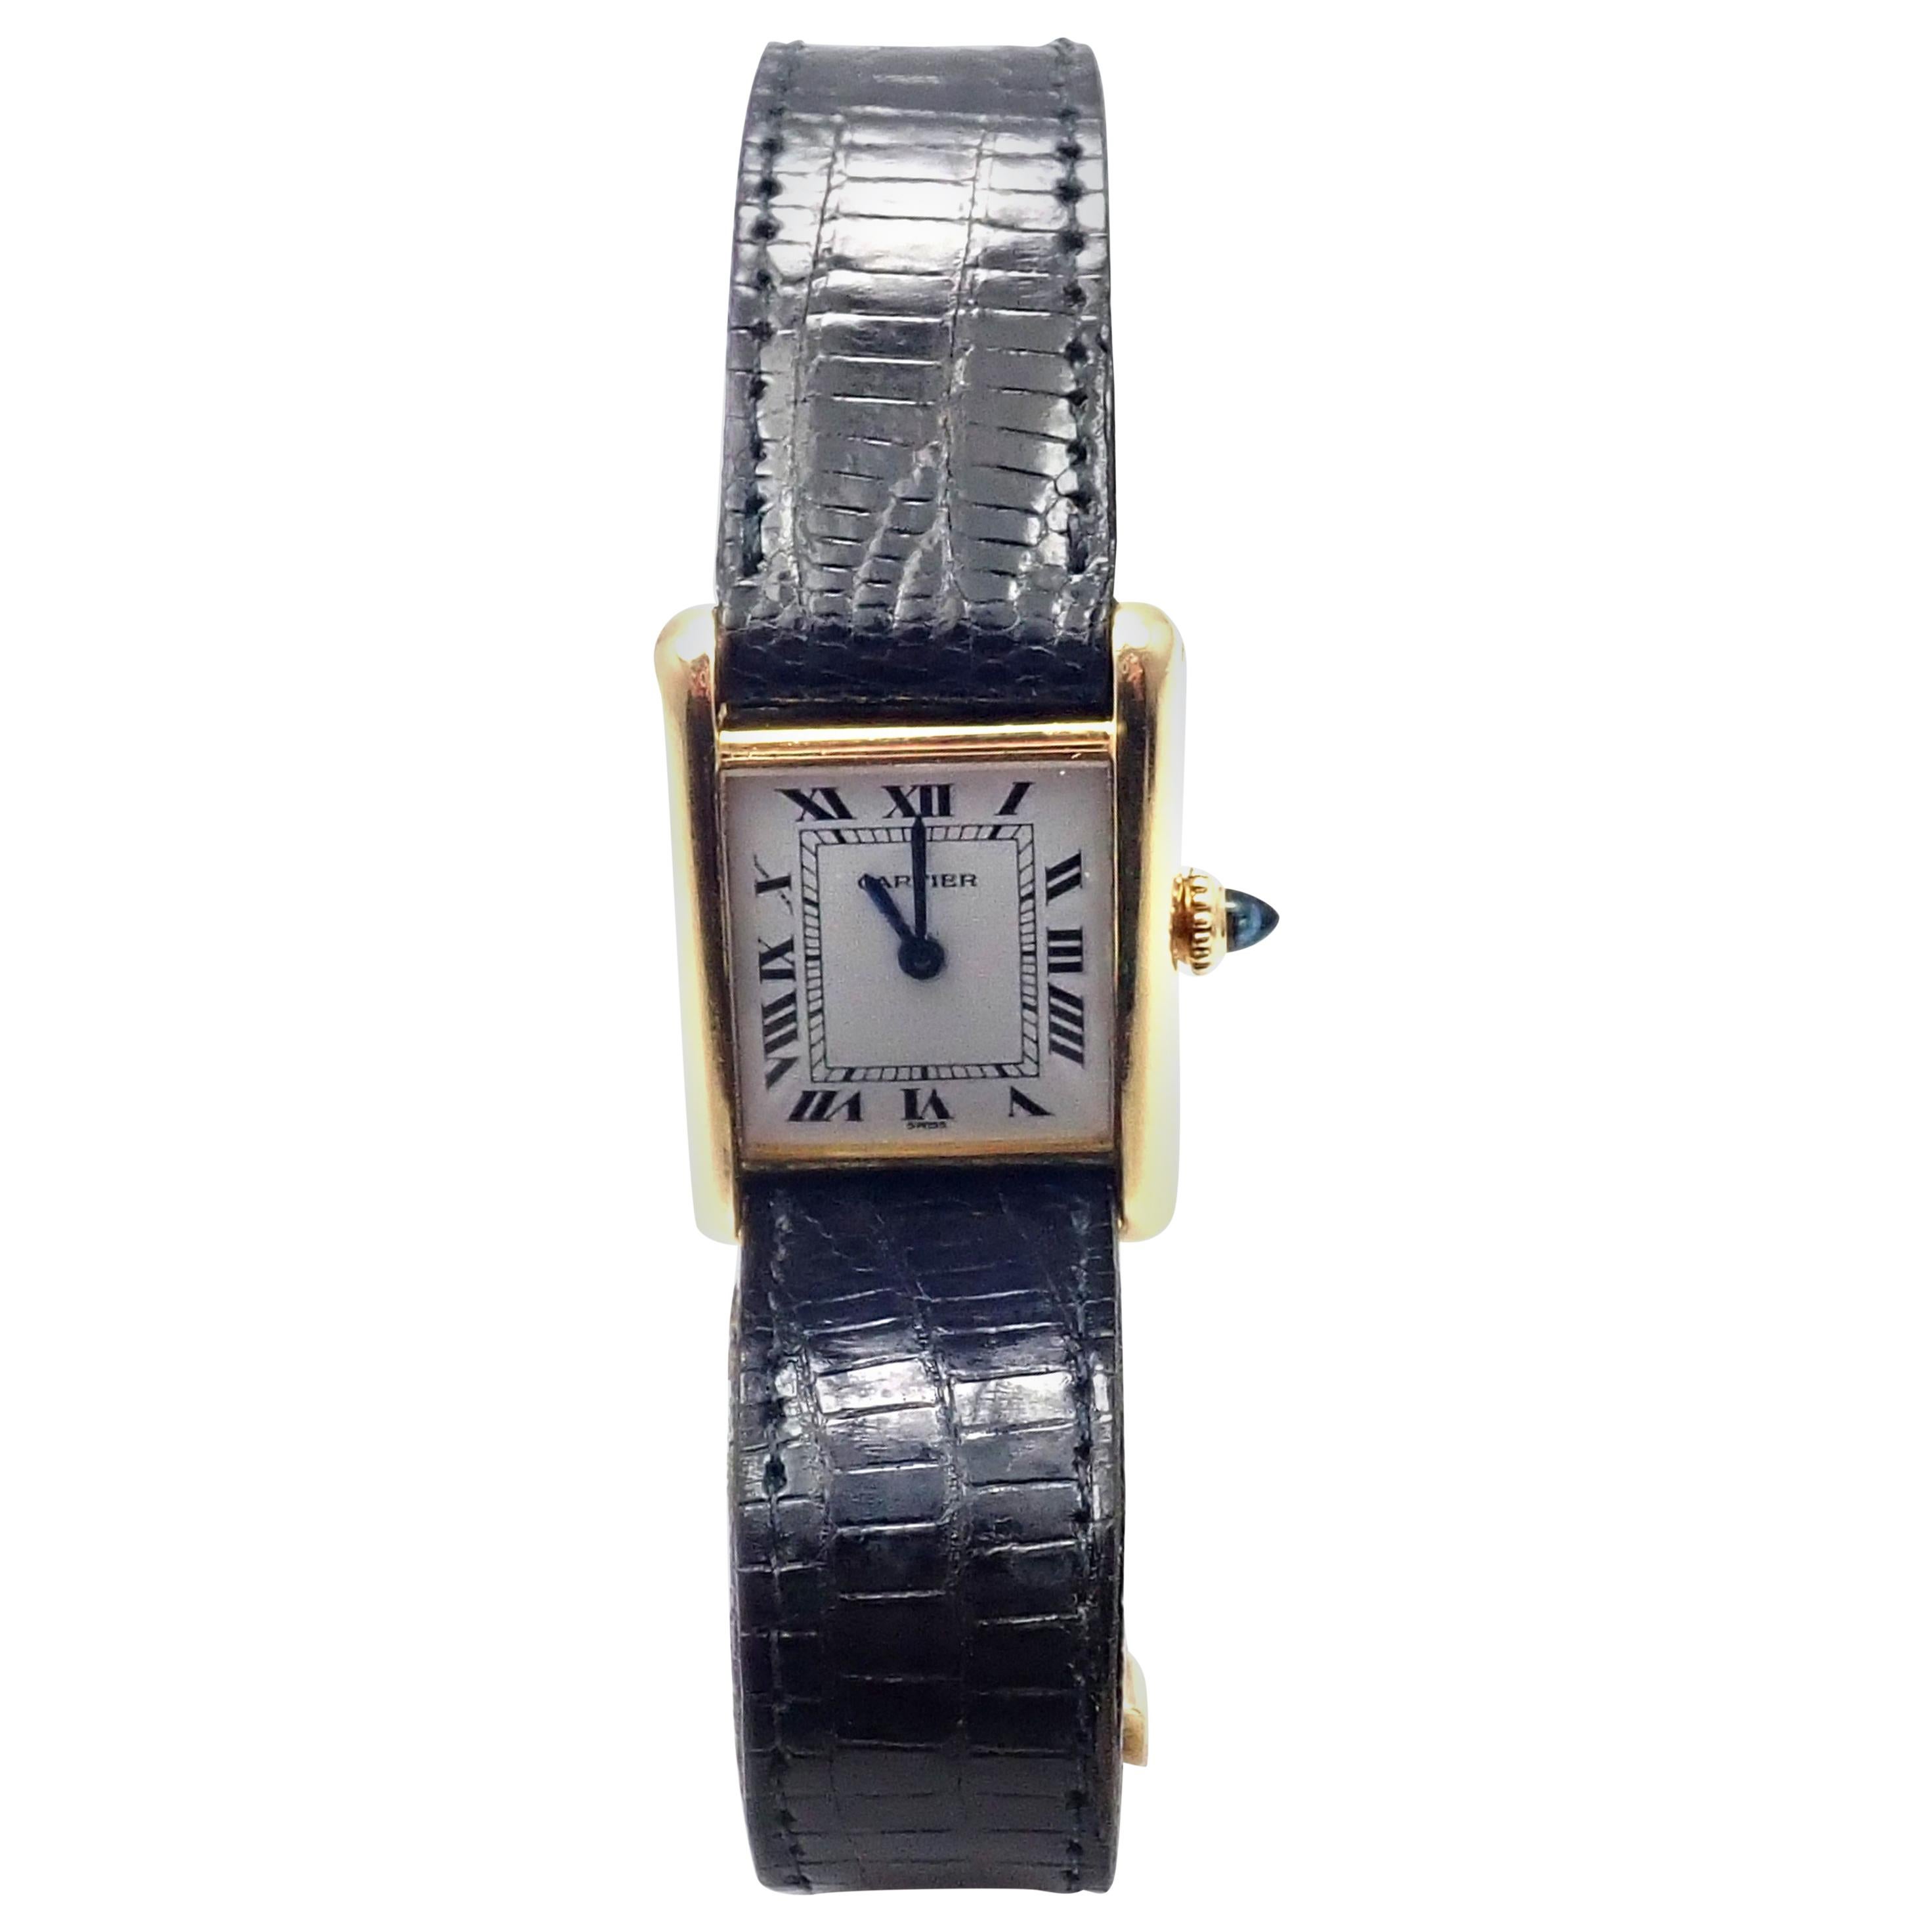 Lady's 18k yellow gold Cartier Tank wristwatch.
Details: 
Brand: Cartier
Case Material: 18k Yellow Gold
Dial Color: White
Movement: Manual Wind
Functions: Hours, Minutes
Crystal: Cartier mineral glass crystal
Case: 28mm x 21mm
Crown: Sapphire
Strap: